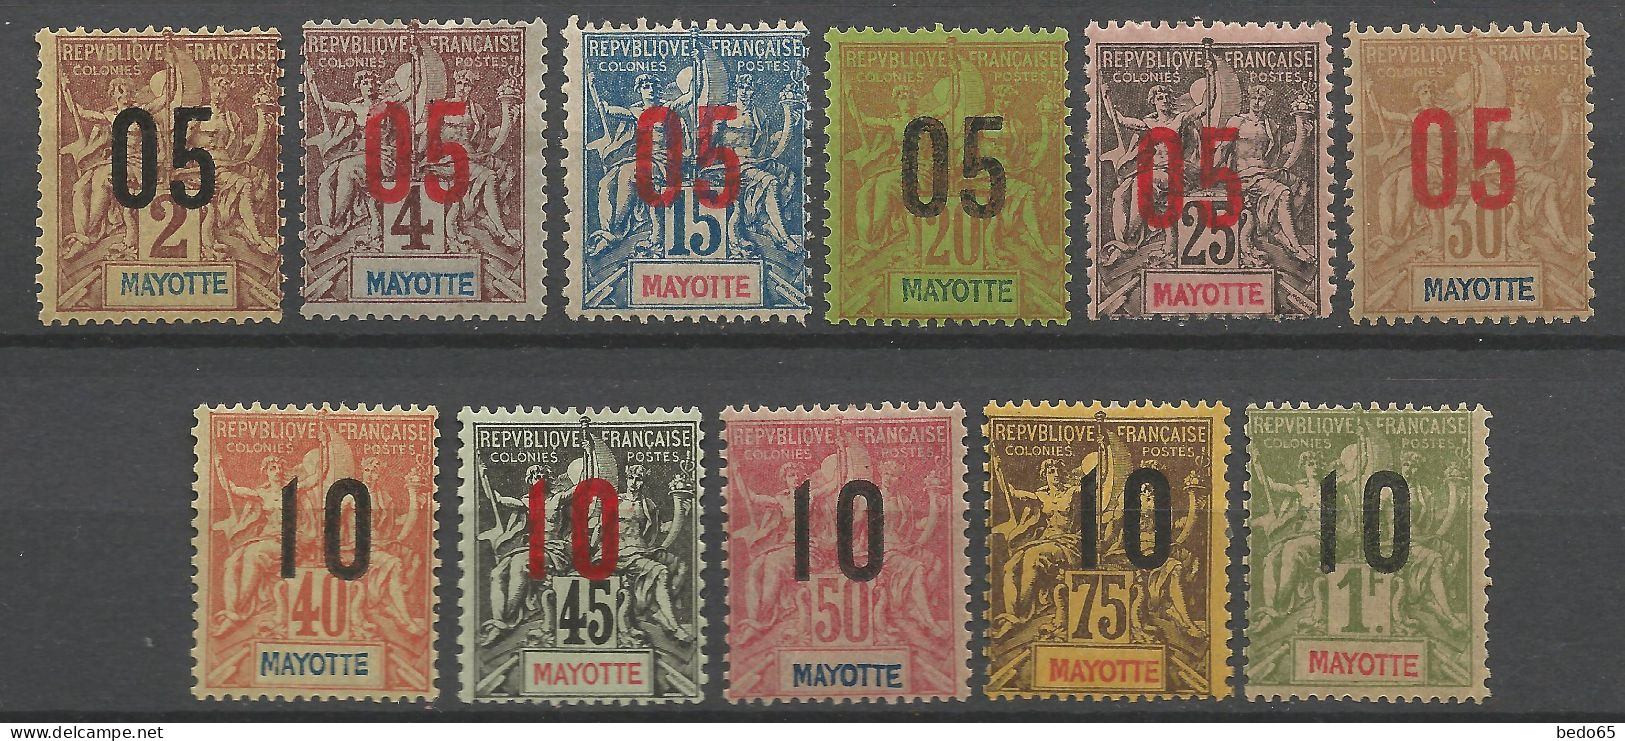 MAYOTTE  N° 21 à 31 NEUF* CHARNIERE  / Hinge  / MH - Unused Stamps